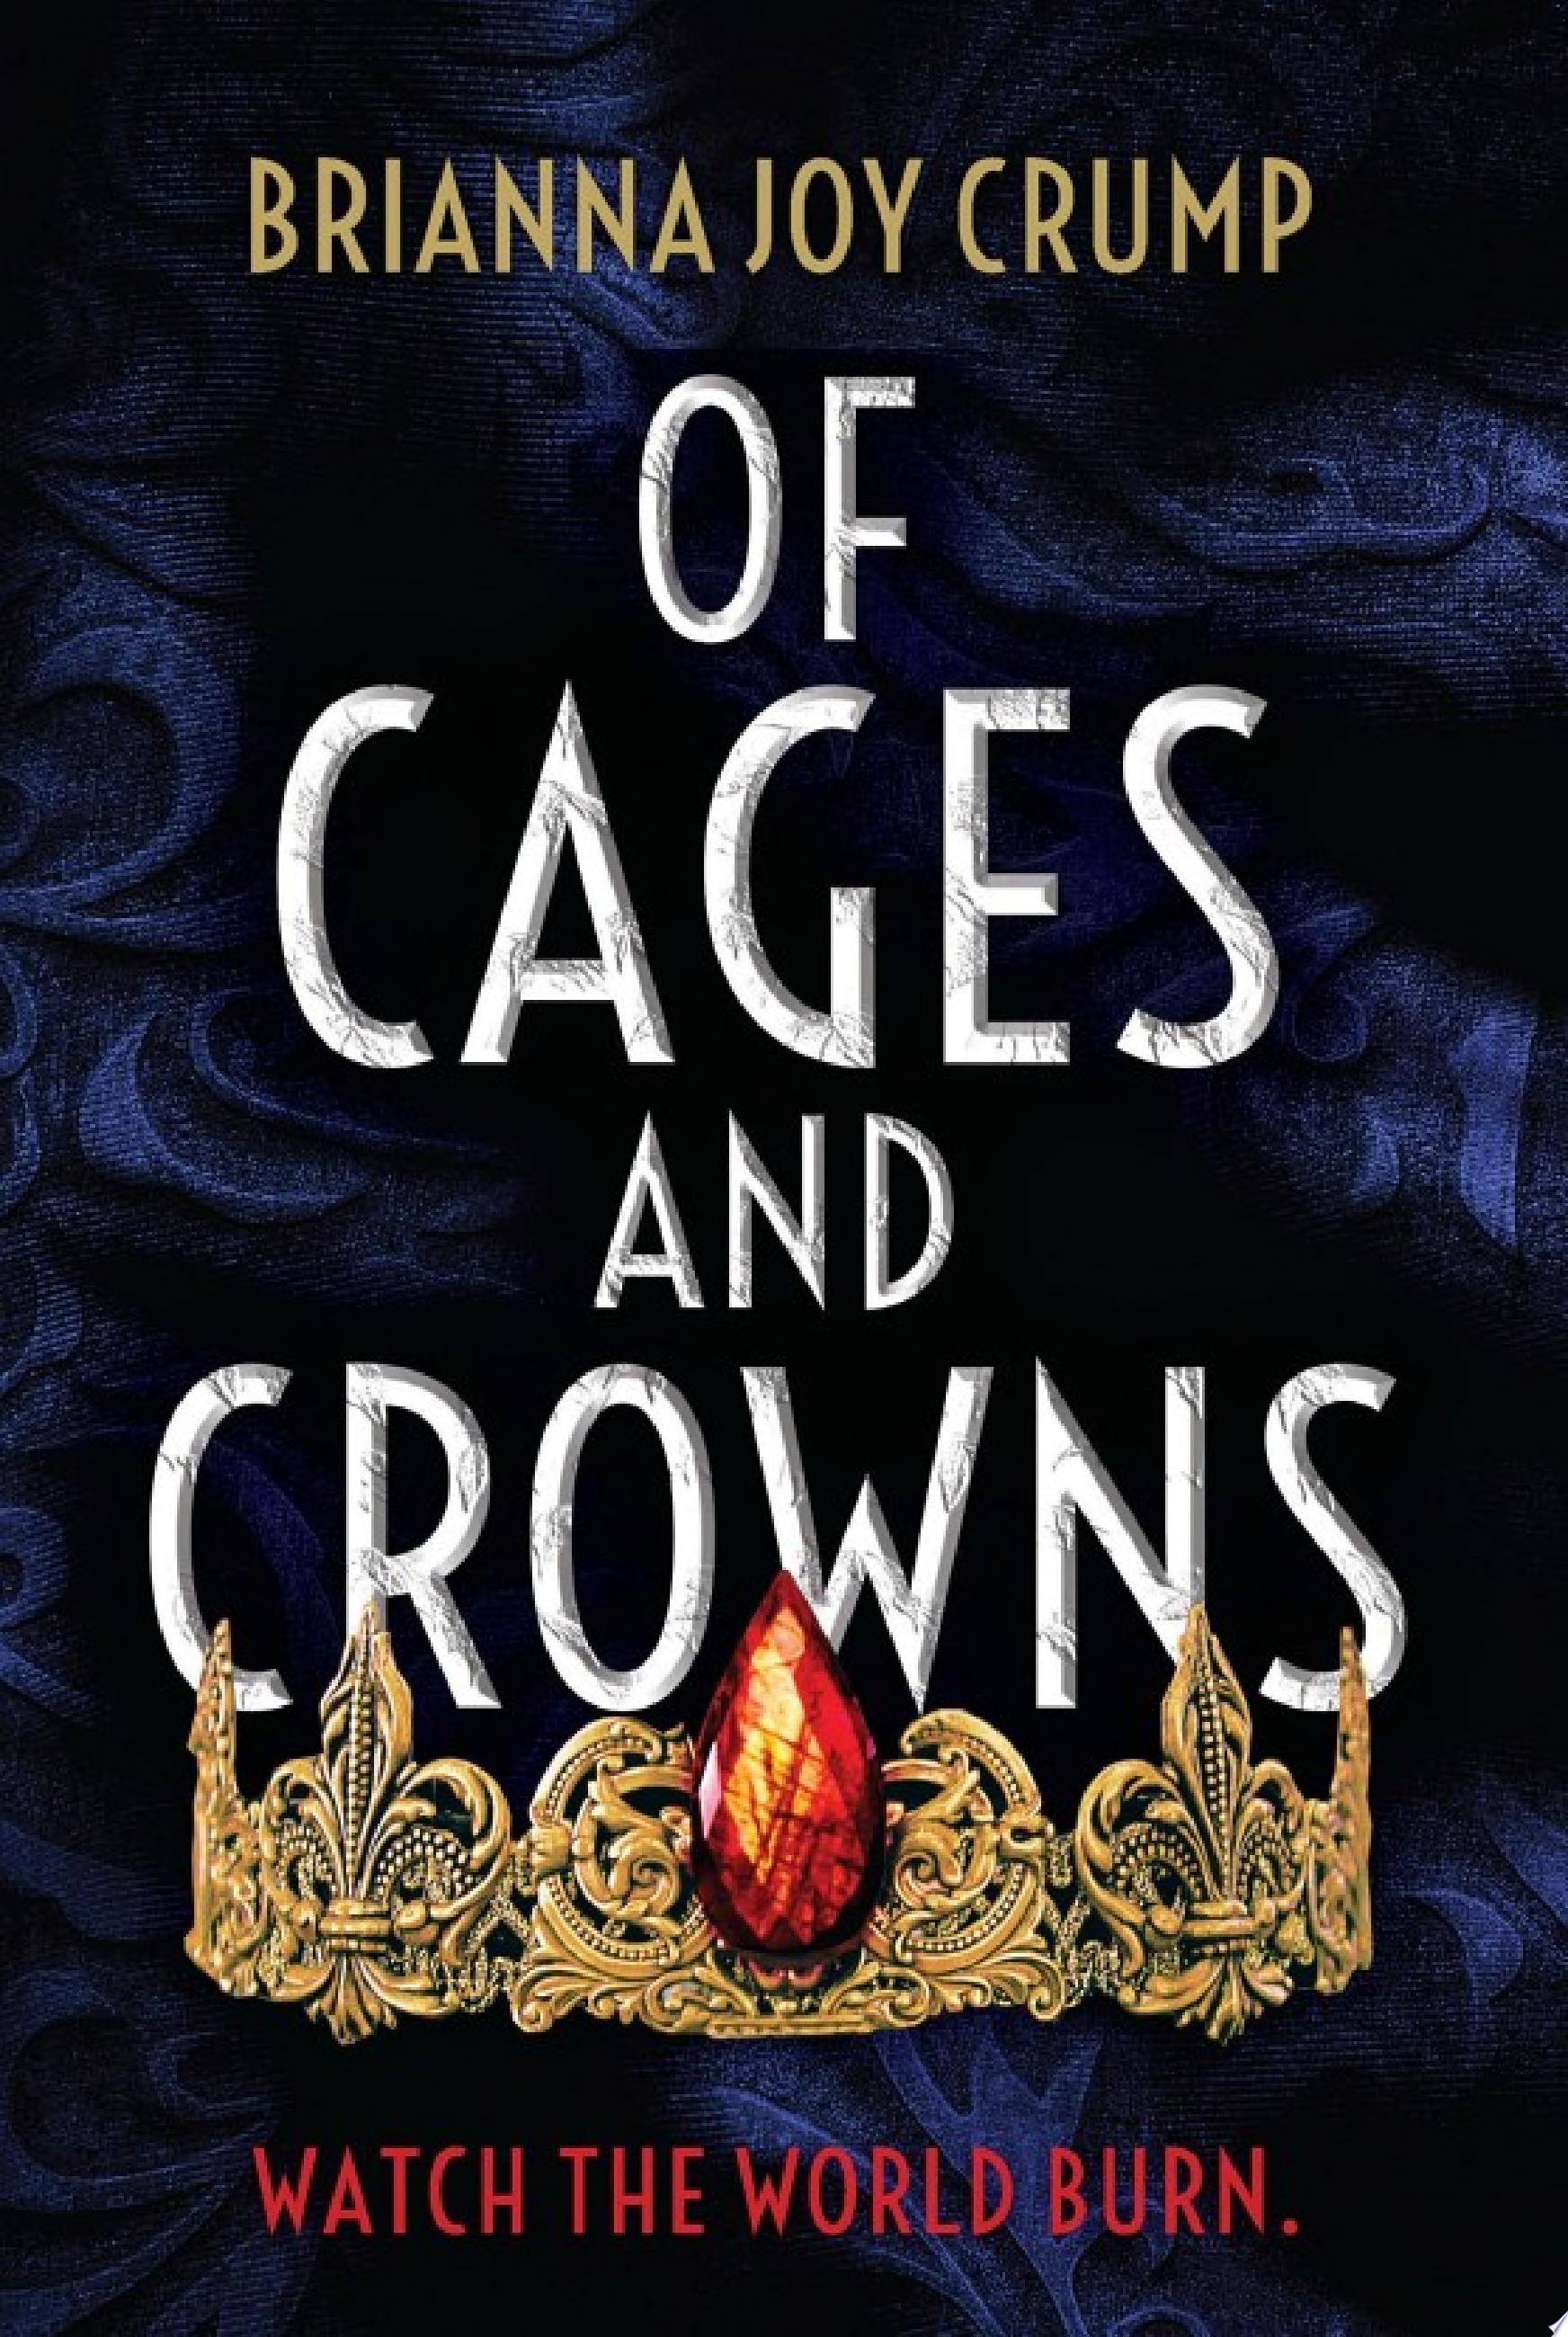 Image for "Of Cages and Crowns"